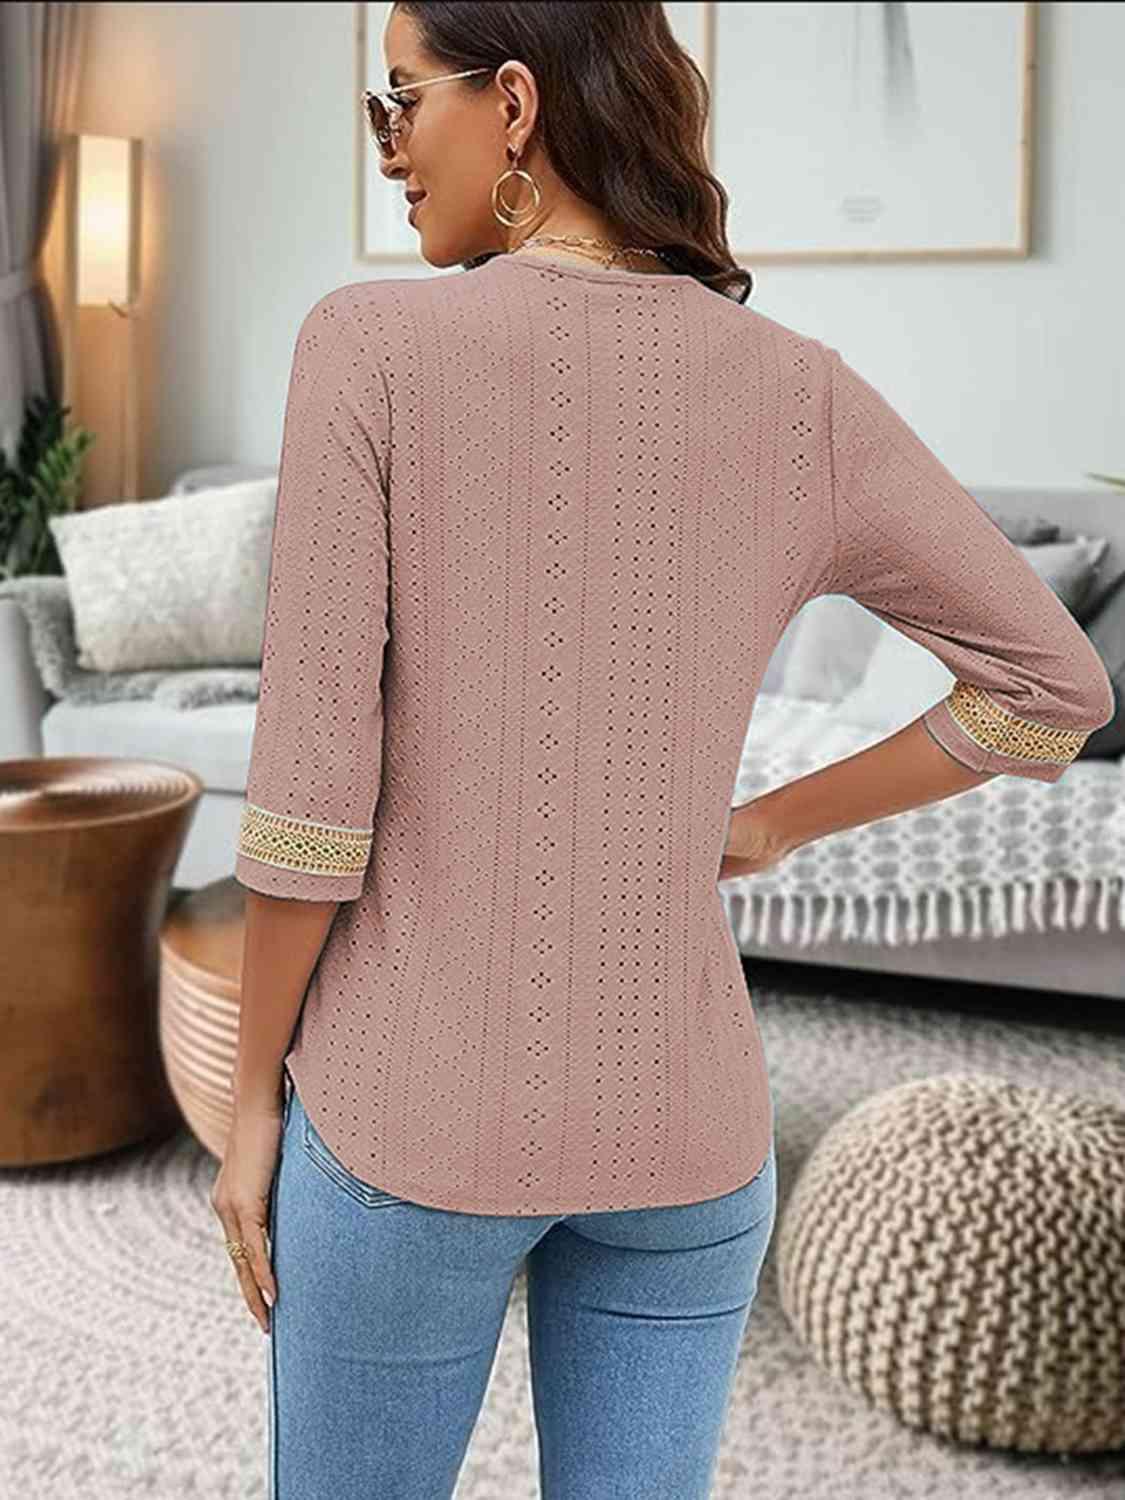 a woman standing in a living room wearing a pink sweater